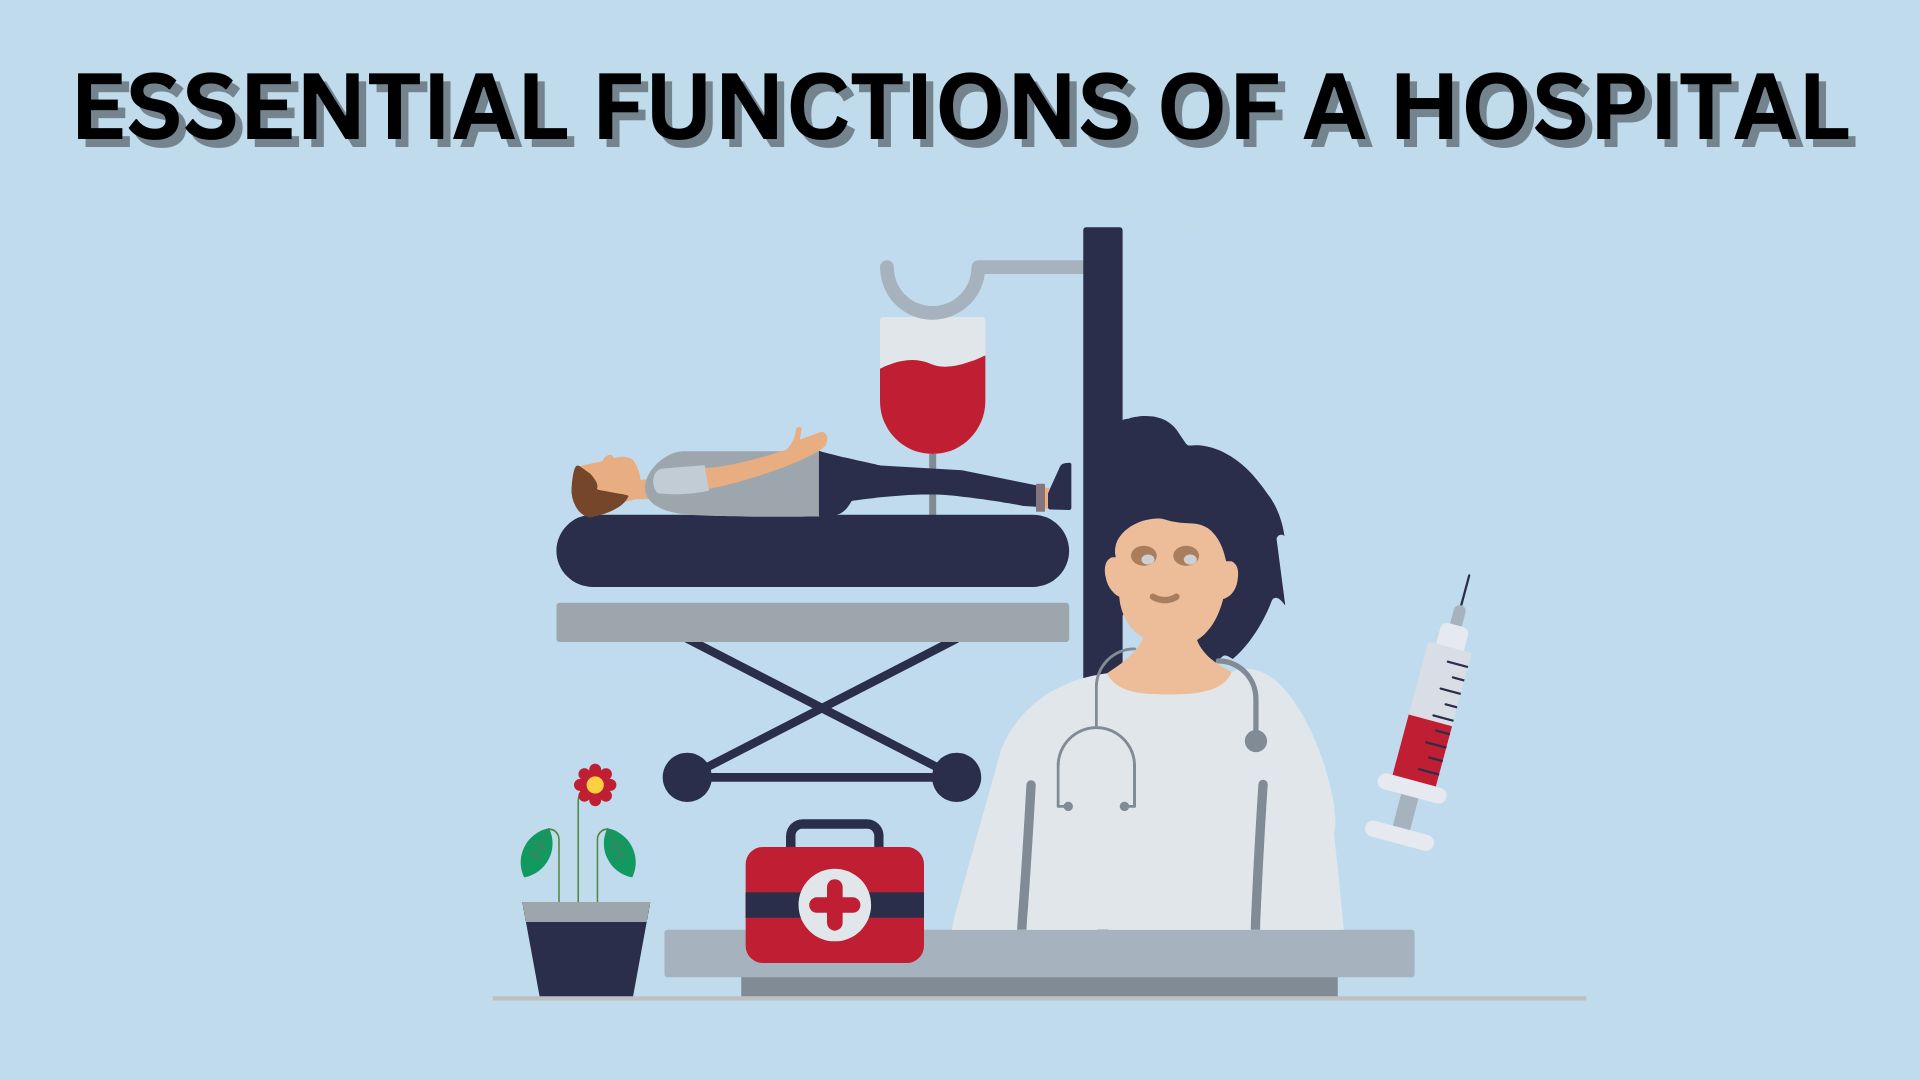 ESSENTIAL FUNCTIONS OF A HOSPITAL